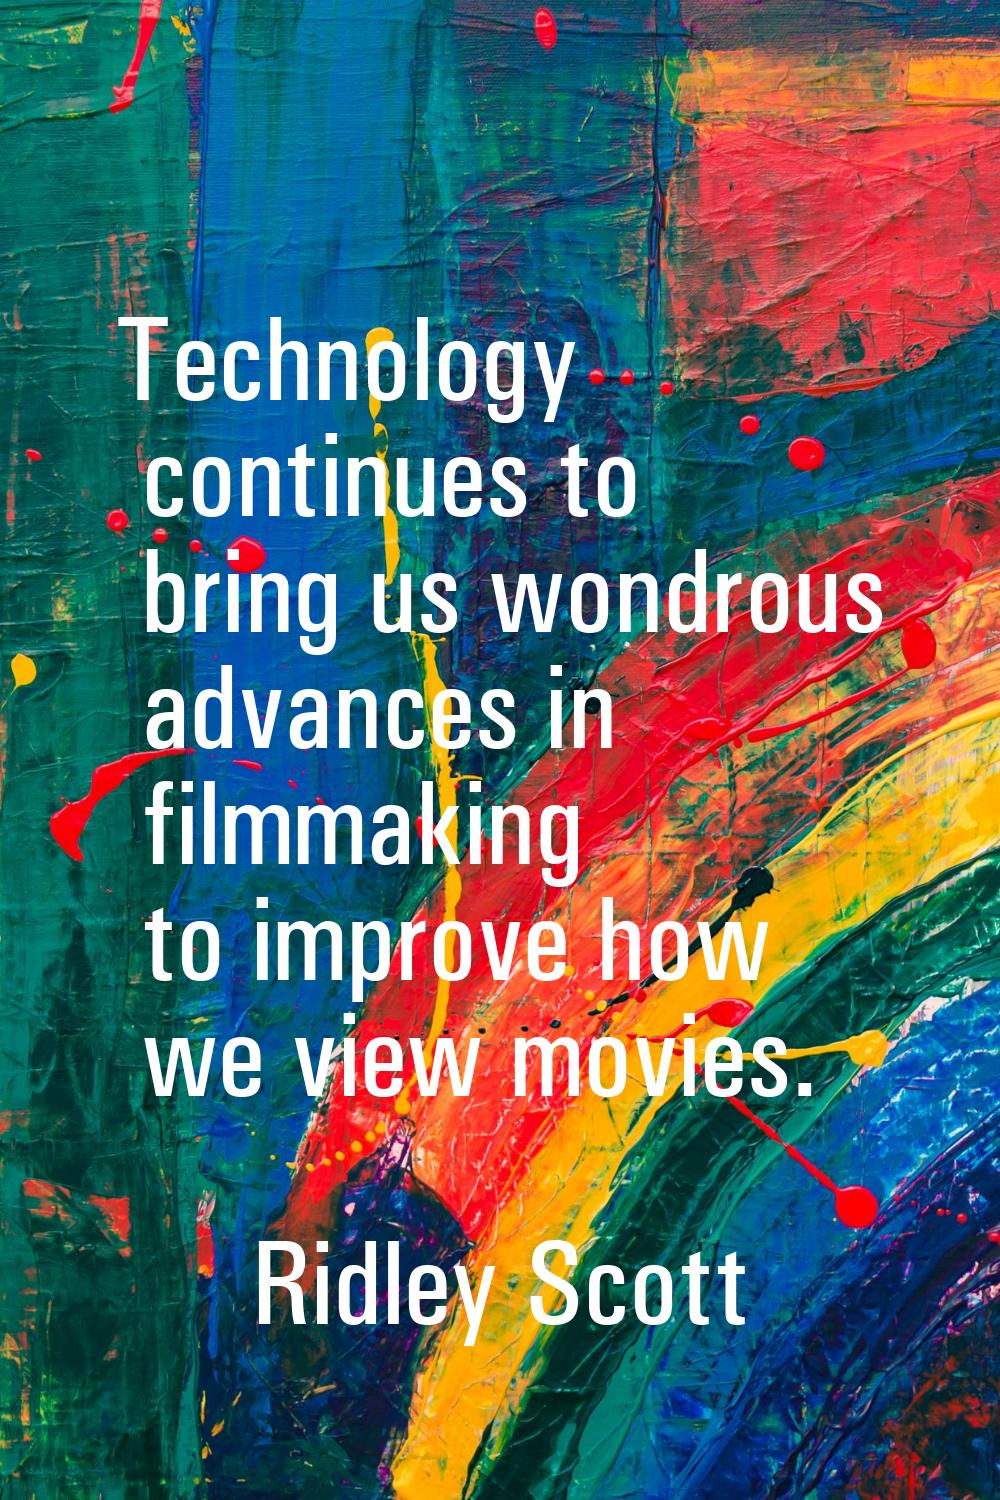 Technology continues to bring us wondrous advances in filmmaking to improve how we view movies.